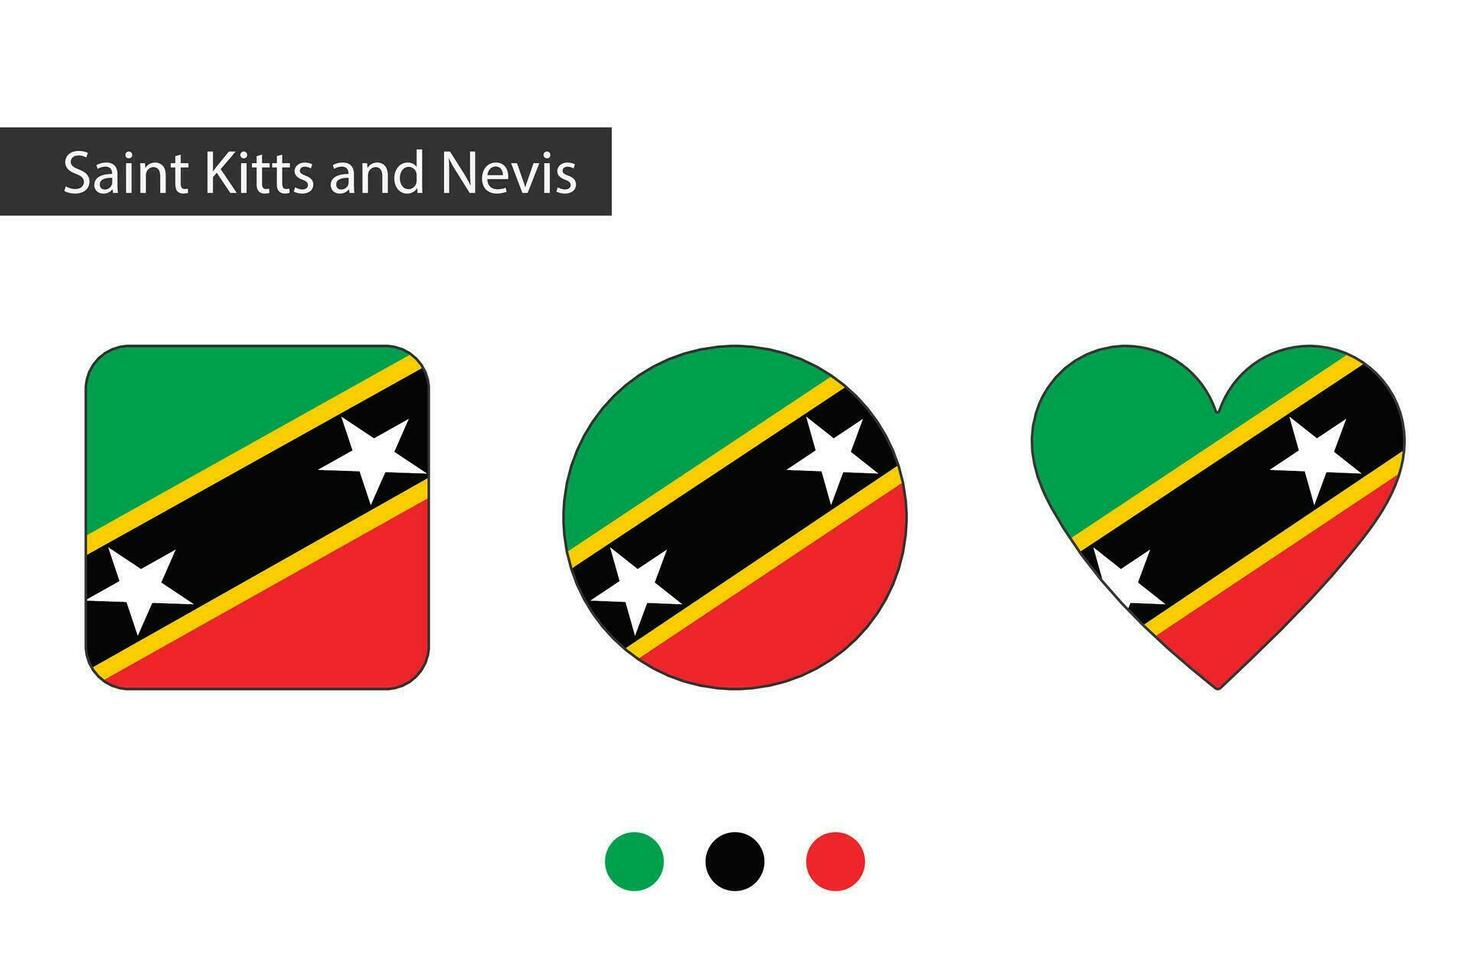 Saint Kitts and Nevis 3 shapes square, circle, heart with city flag. Isolated on white background. vector